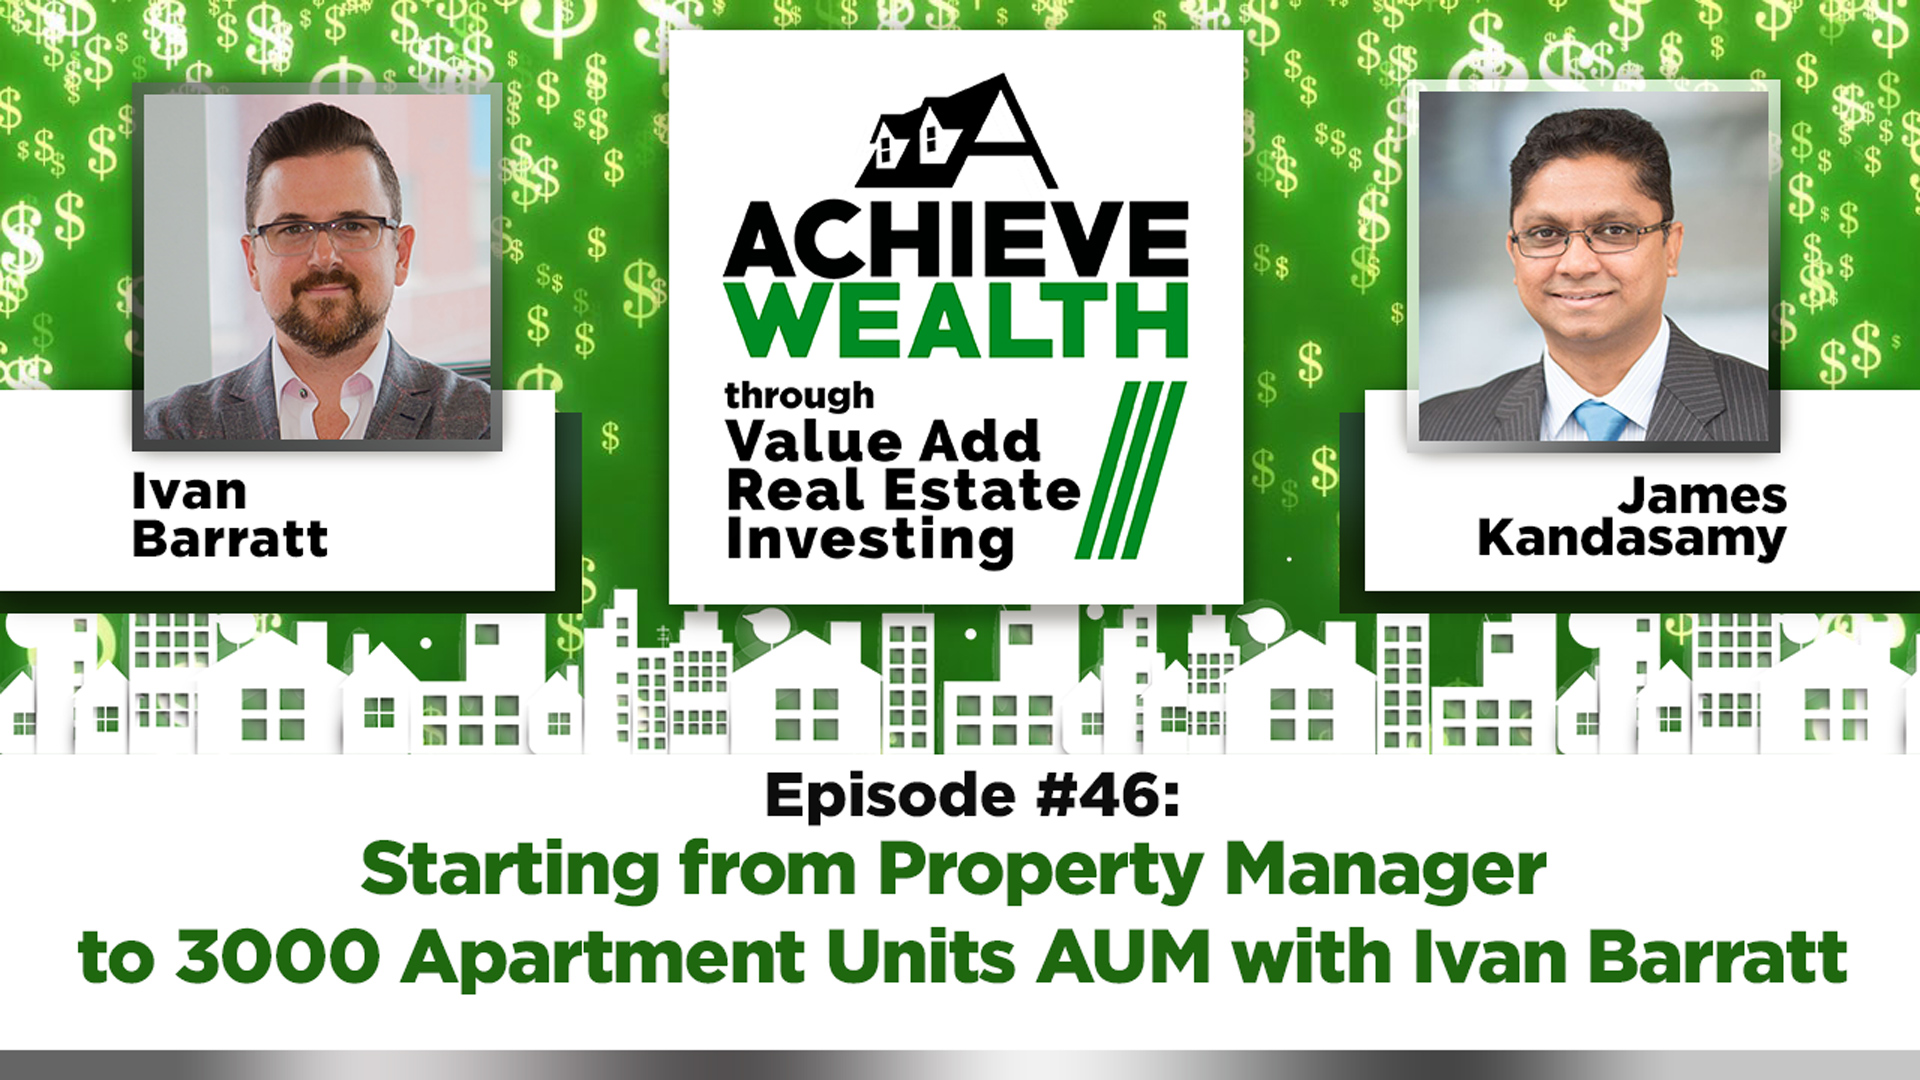 Ep#46 Starting from Property Manager to 3000 Apartment Units AUM with Ivan Barratt